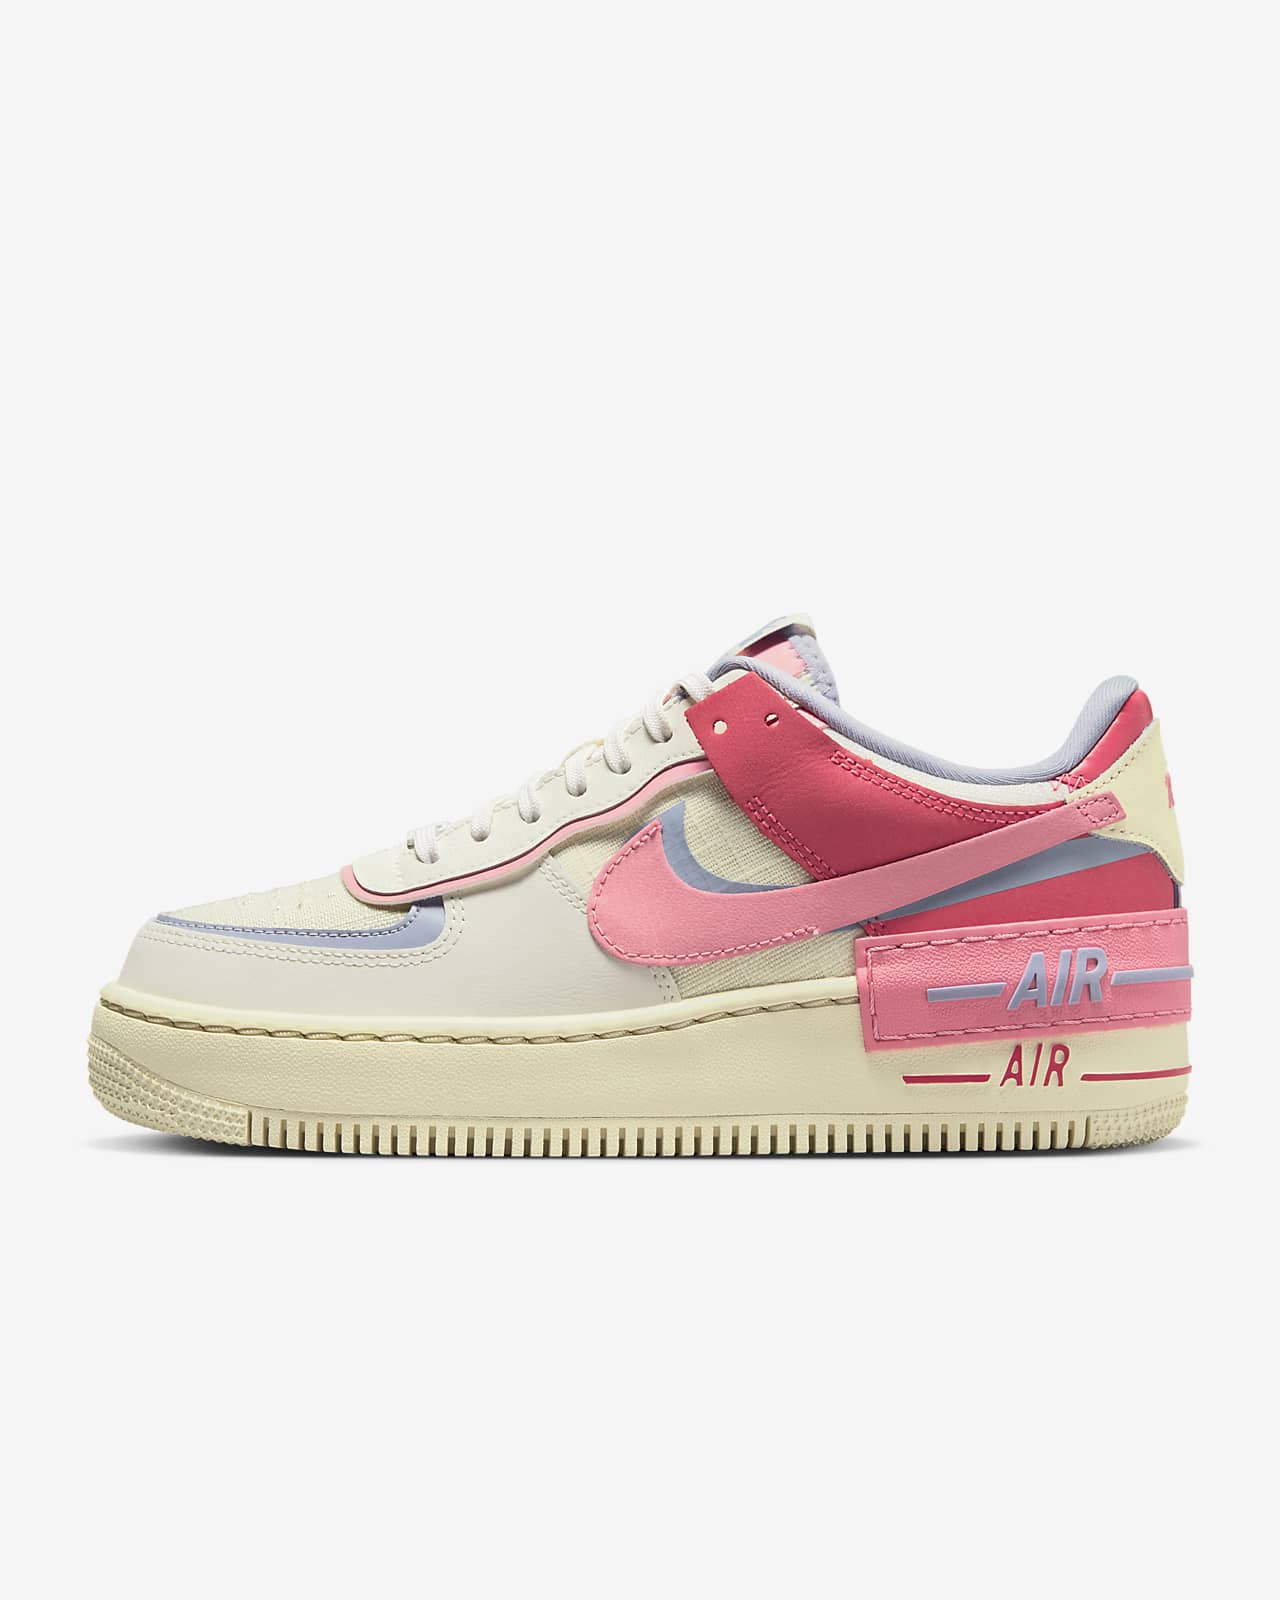 Nike Air Force 1 Shadow Womens Shoes Review